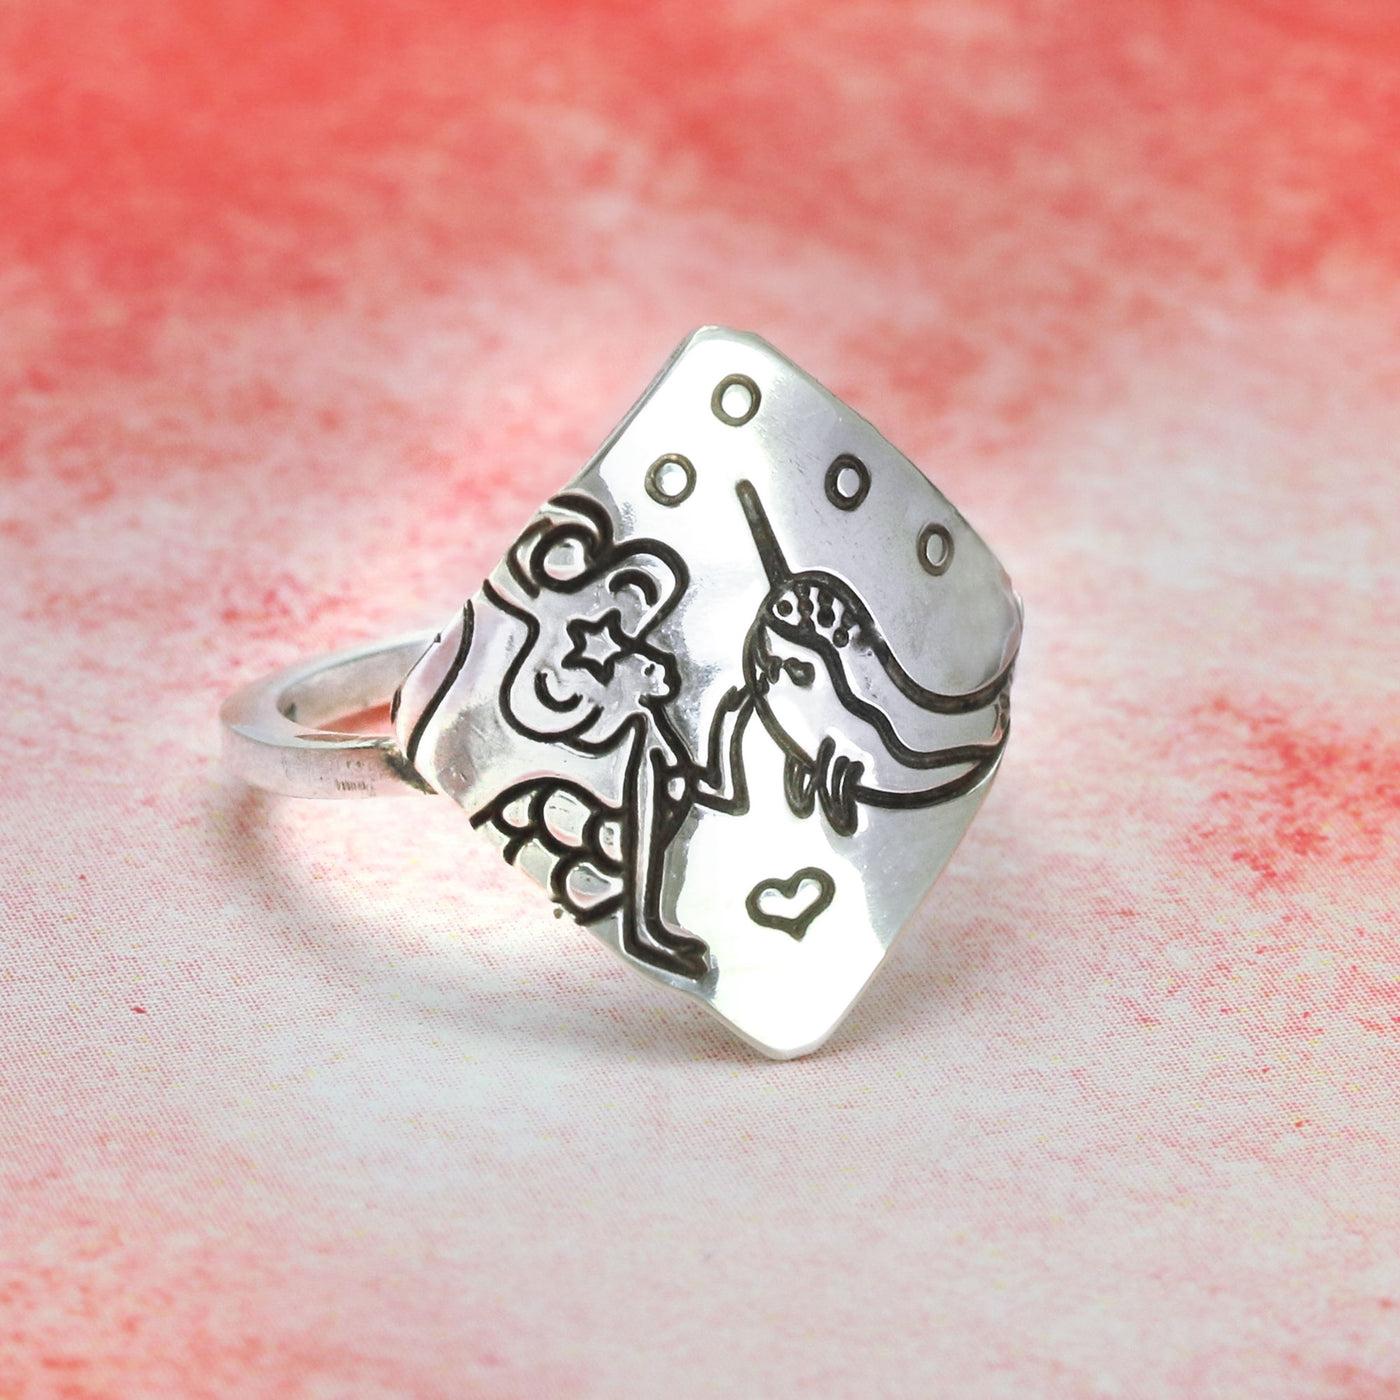 MA1388 - 100 Mini Stamps in Sterling Silver - Only 1 Available